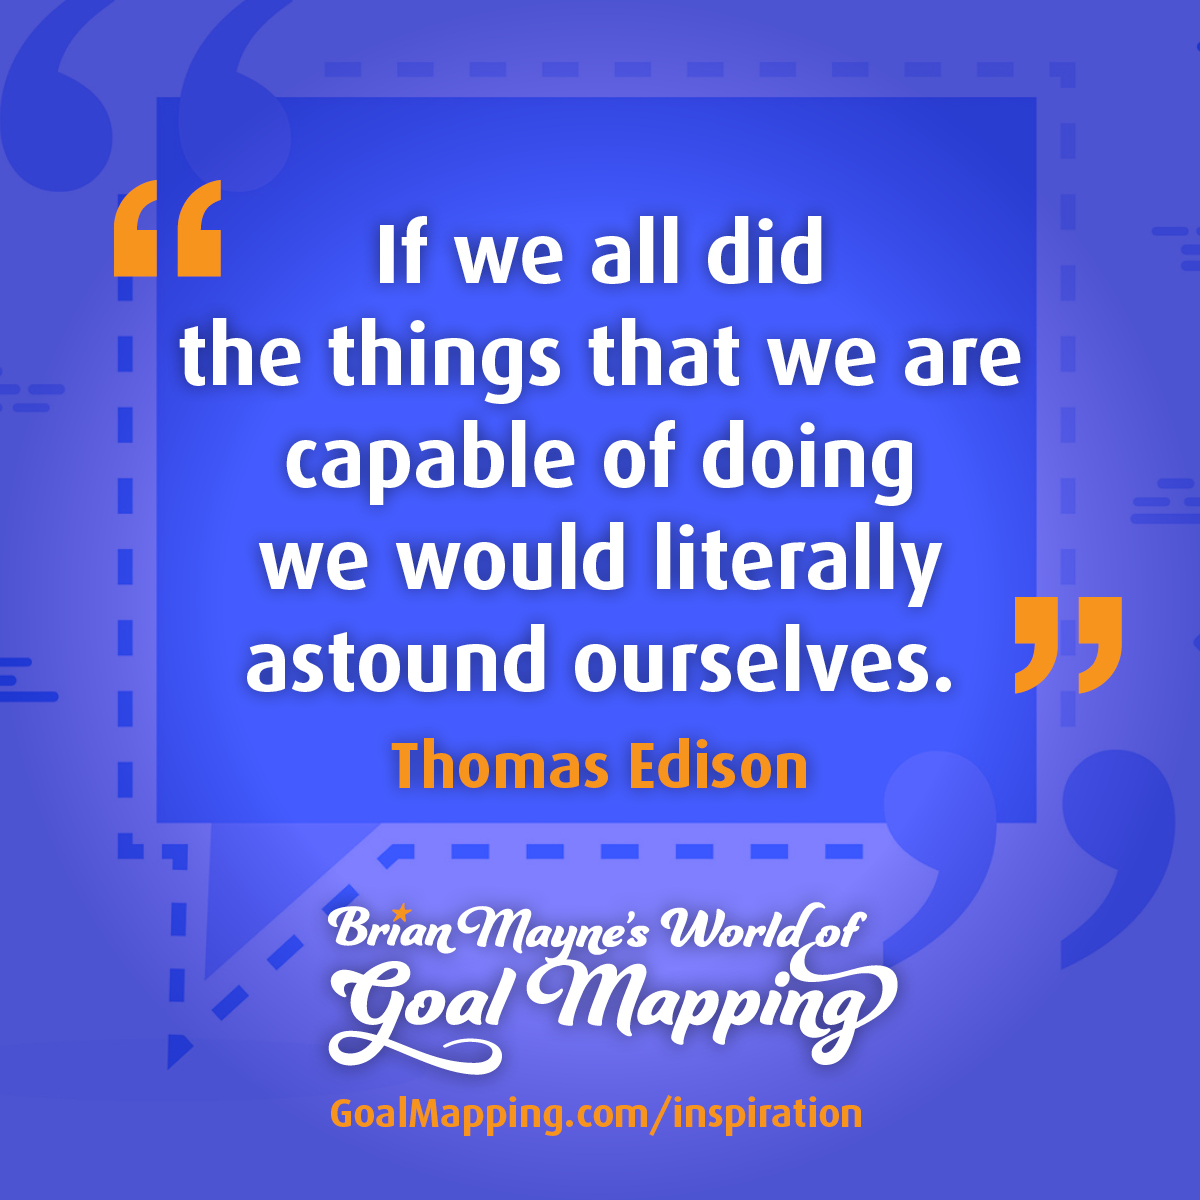 "If we all did the things that we are capable of doing we would literally astound ourselves." Thomas Edison